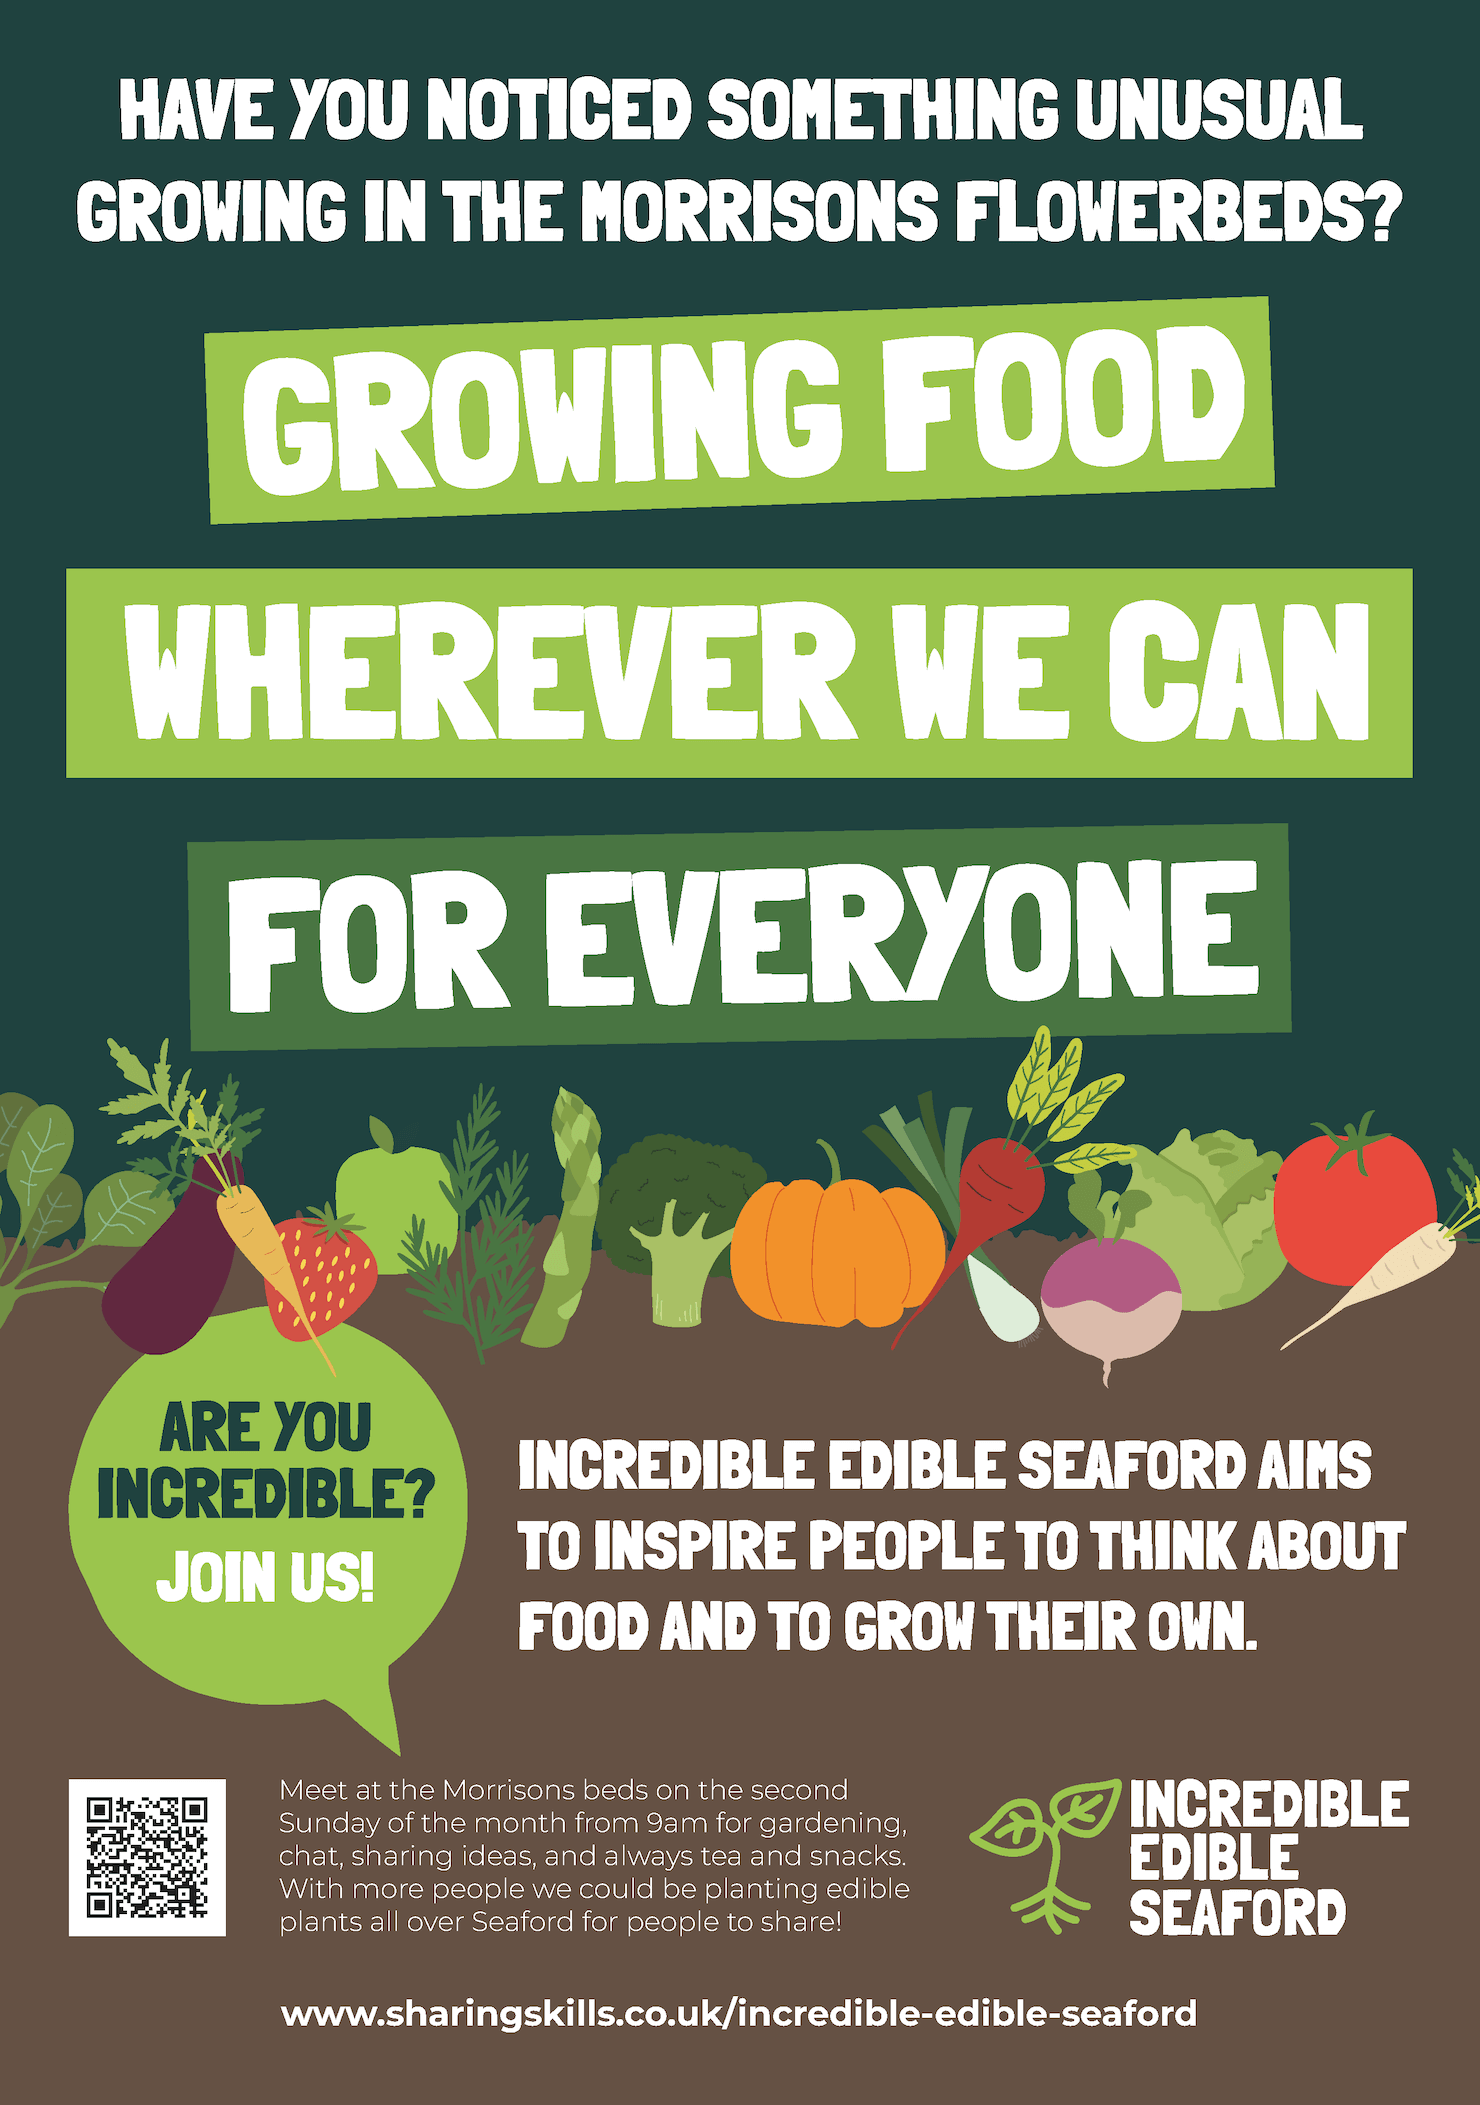 INCREDIBLE EDIBLE SEAFORD AIMS TO INSPIRE PEOPLE TO THINK ABOUT FOOD AND TO GROW THEIR OWN.